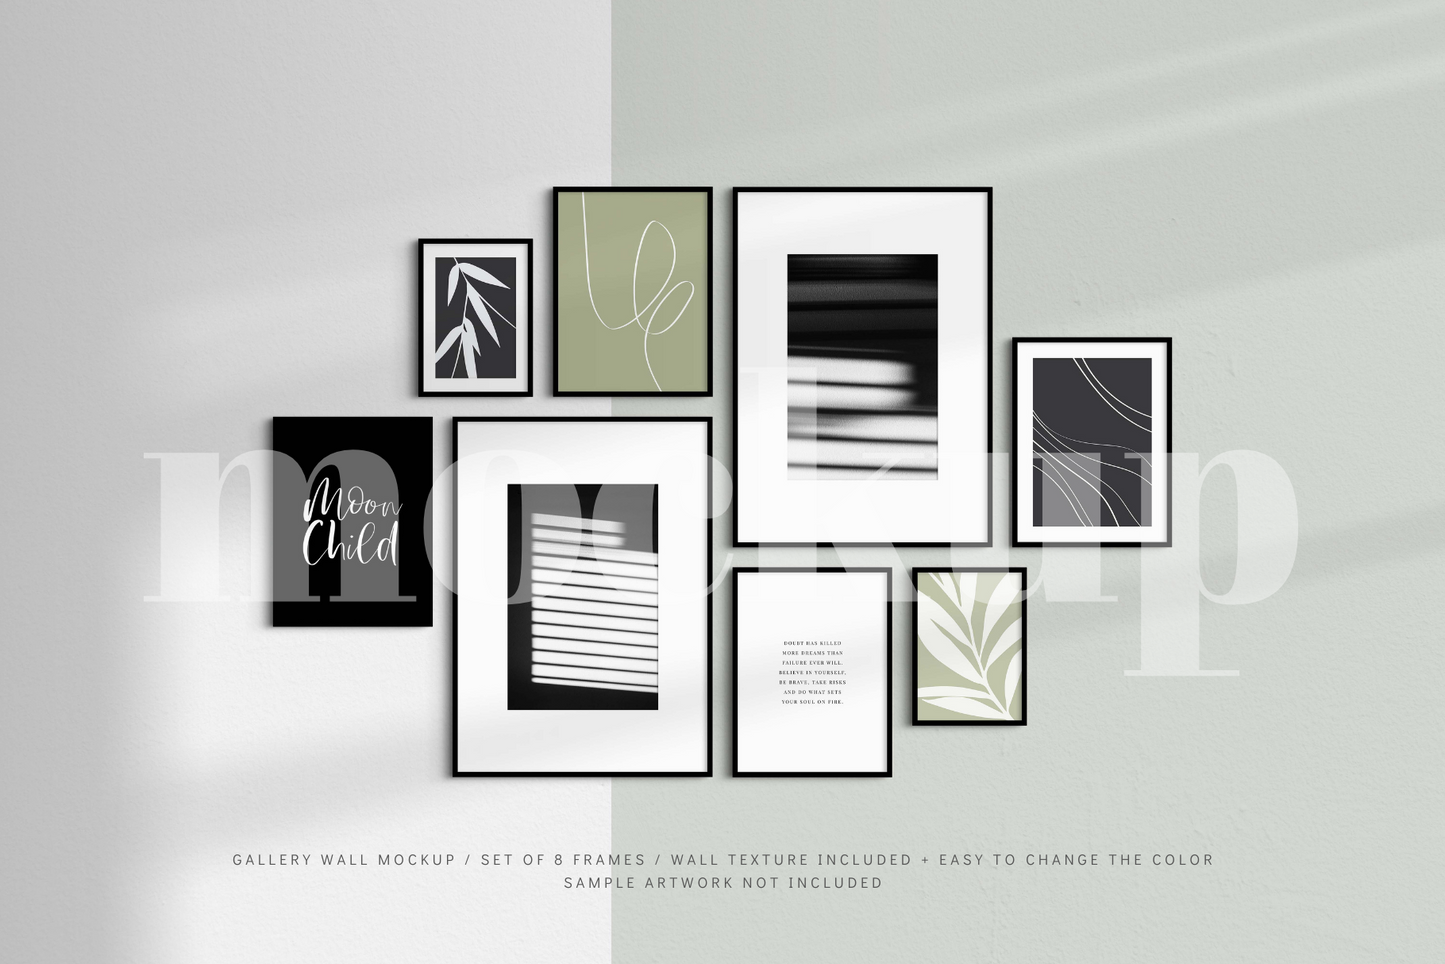 Showcase your artwork in an elegant, modern way with this customizable and easy-to-use minimalist gallery wall frame mockup that features a set of 8 thin black frames.